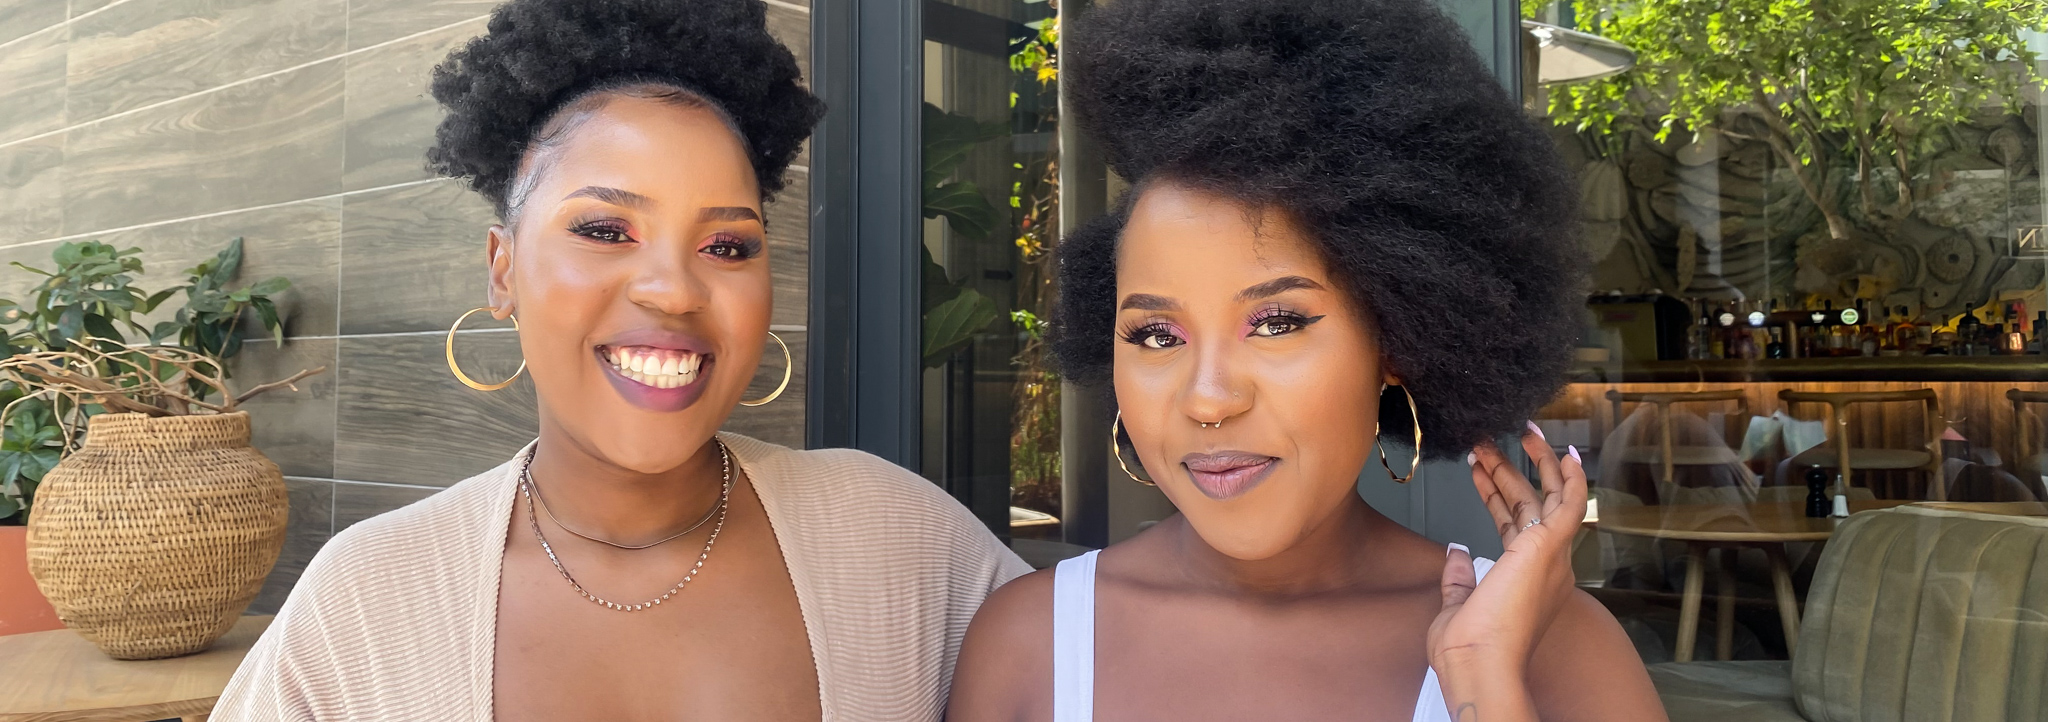 Two women smiling with natural hair afro, afro styling tips, natural hair tips, the suite, the suite edit, brutal fruit